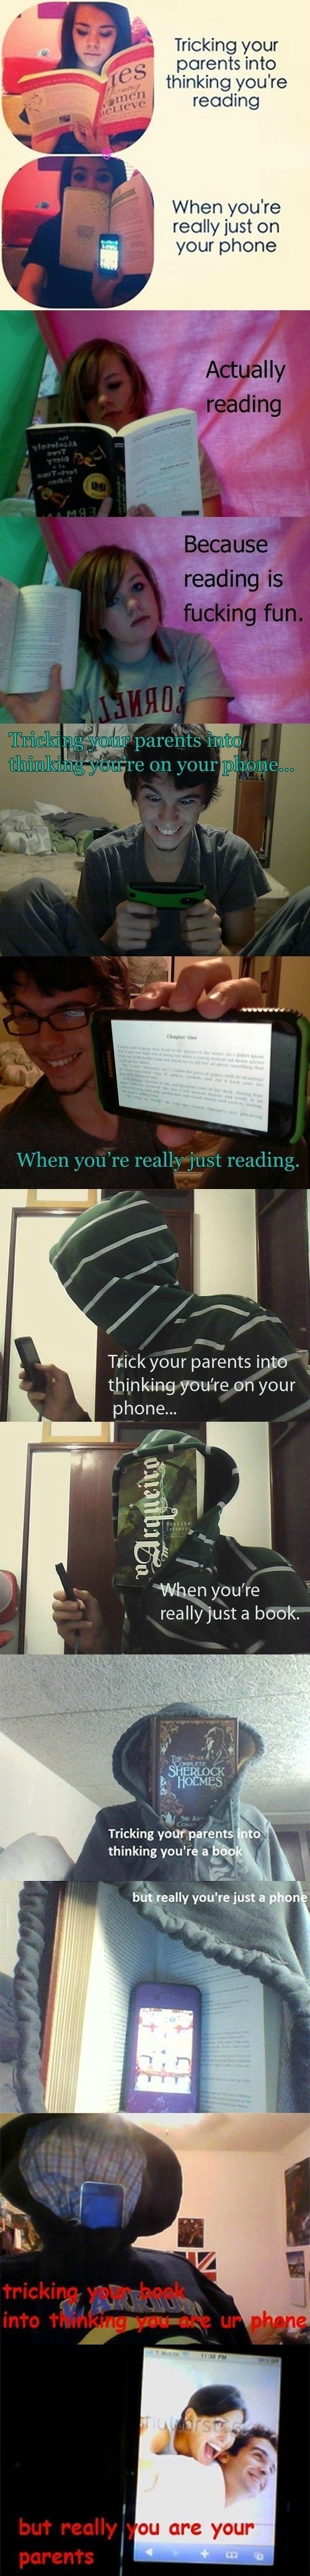 Tricking your parents into thinking you're reading When you're really just on your phone